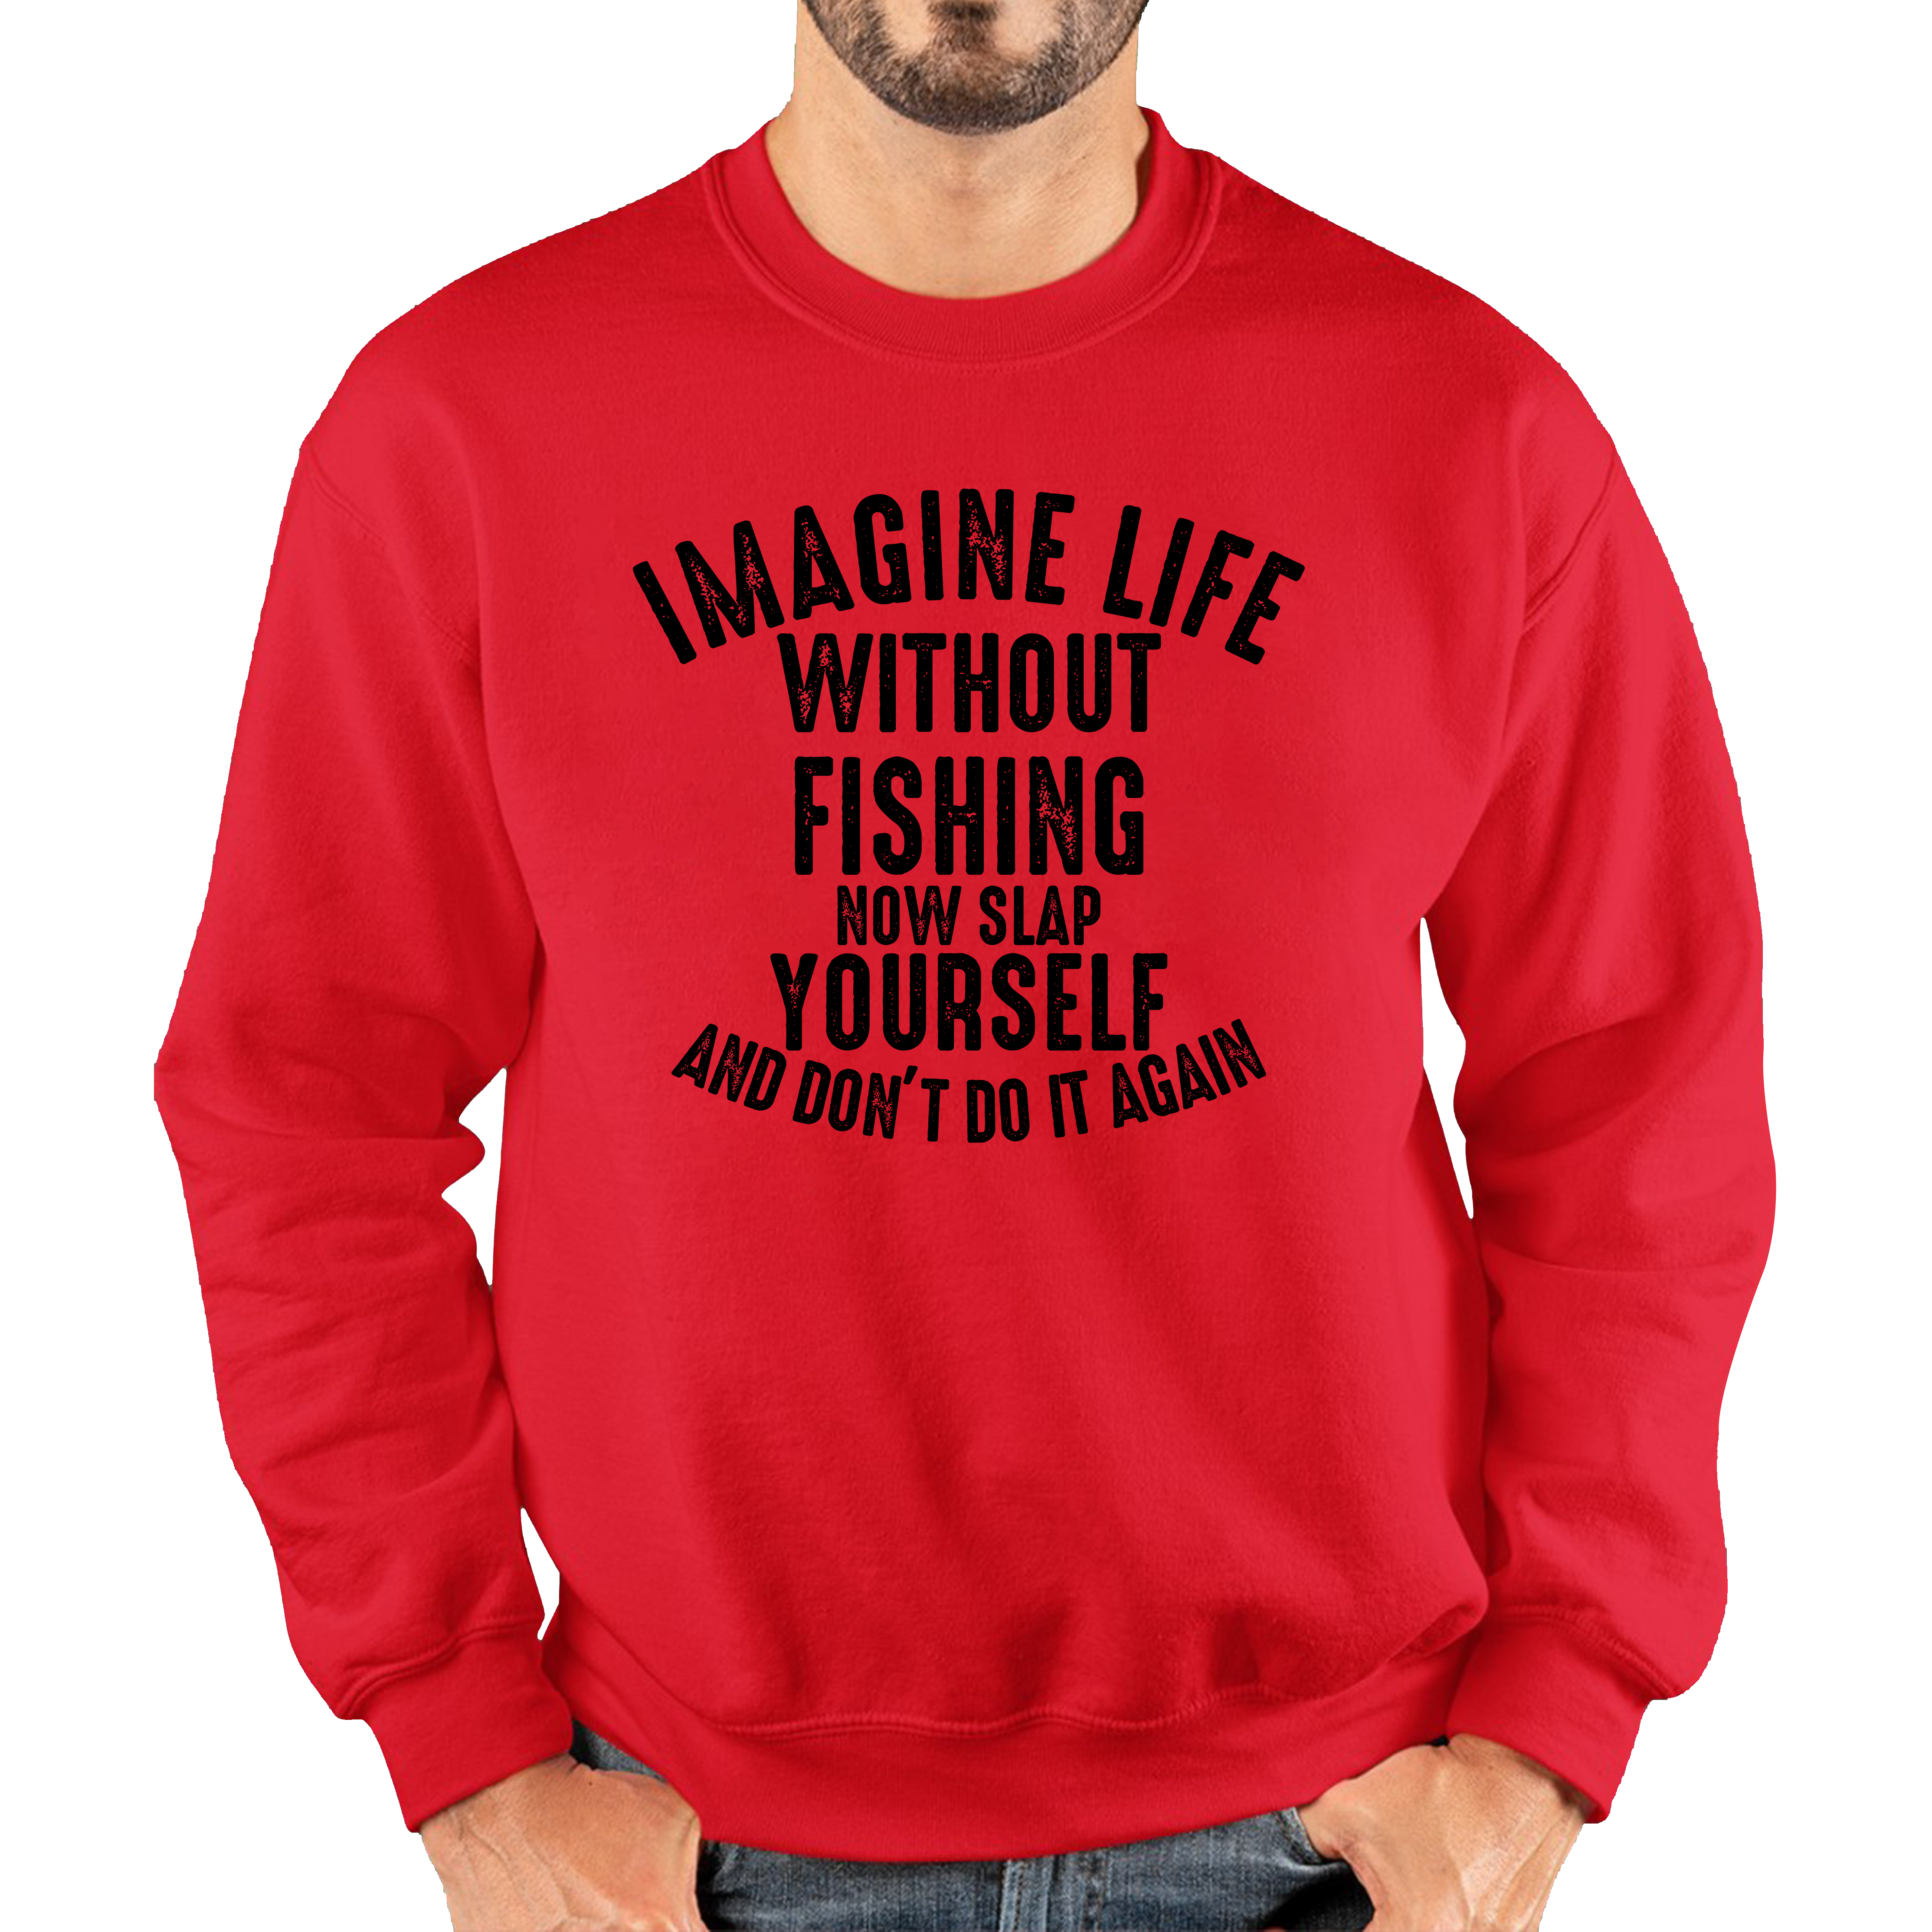 Imagine Life Without Fishing Now Slap Yourself And Don't Do It Again Jumper Fisherman Fishing Adventure Hobby Funny Unisex Sweatshirt